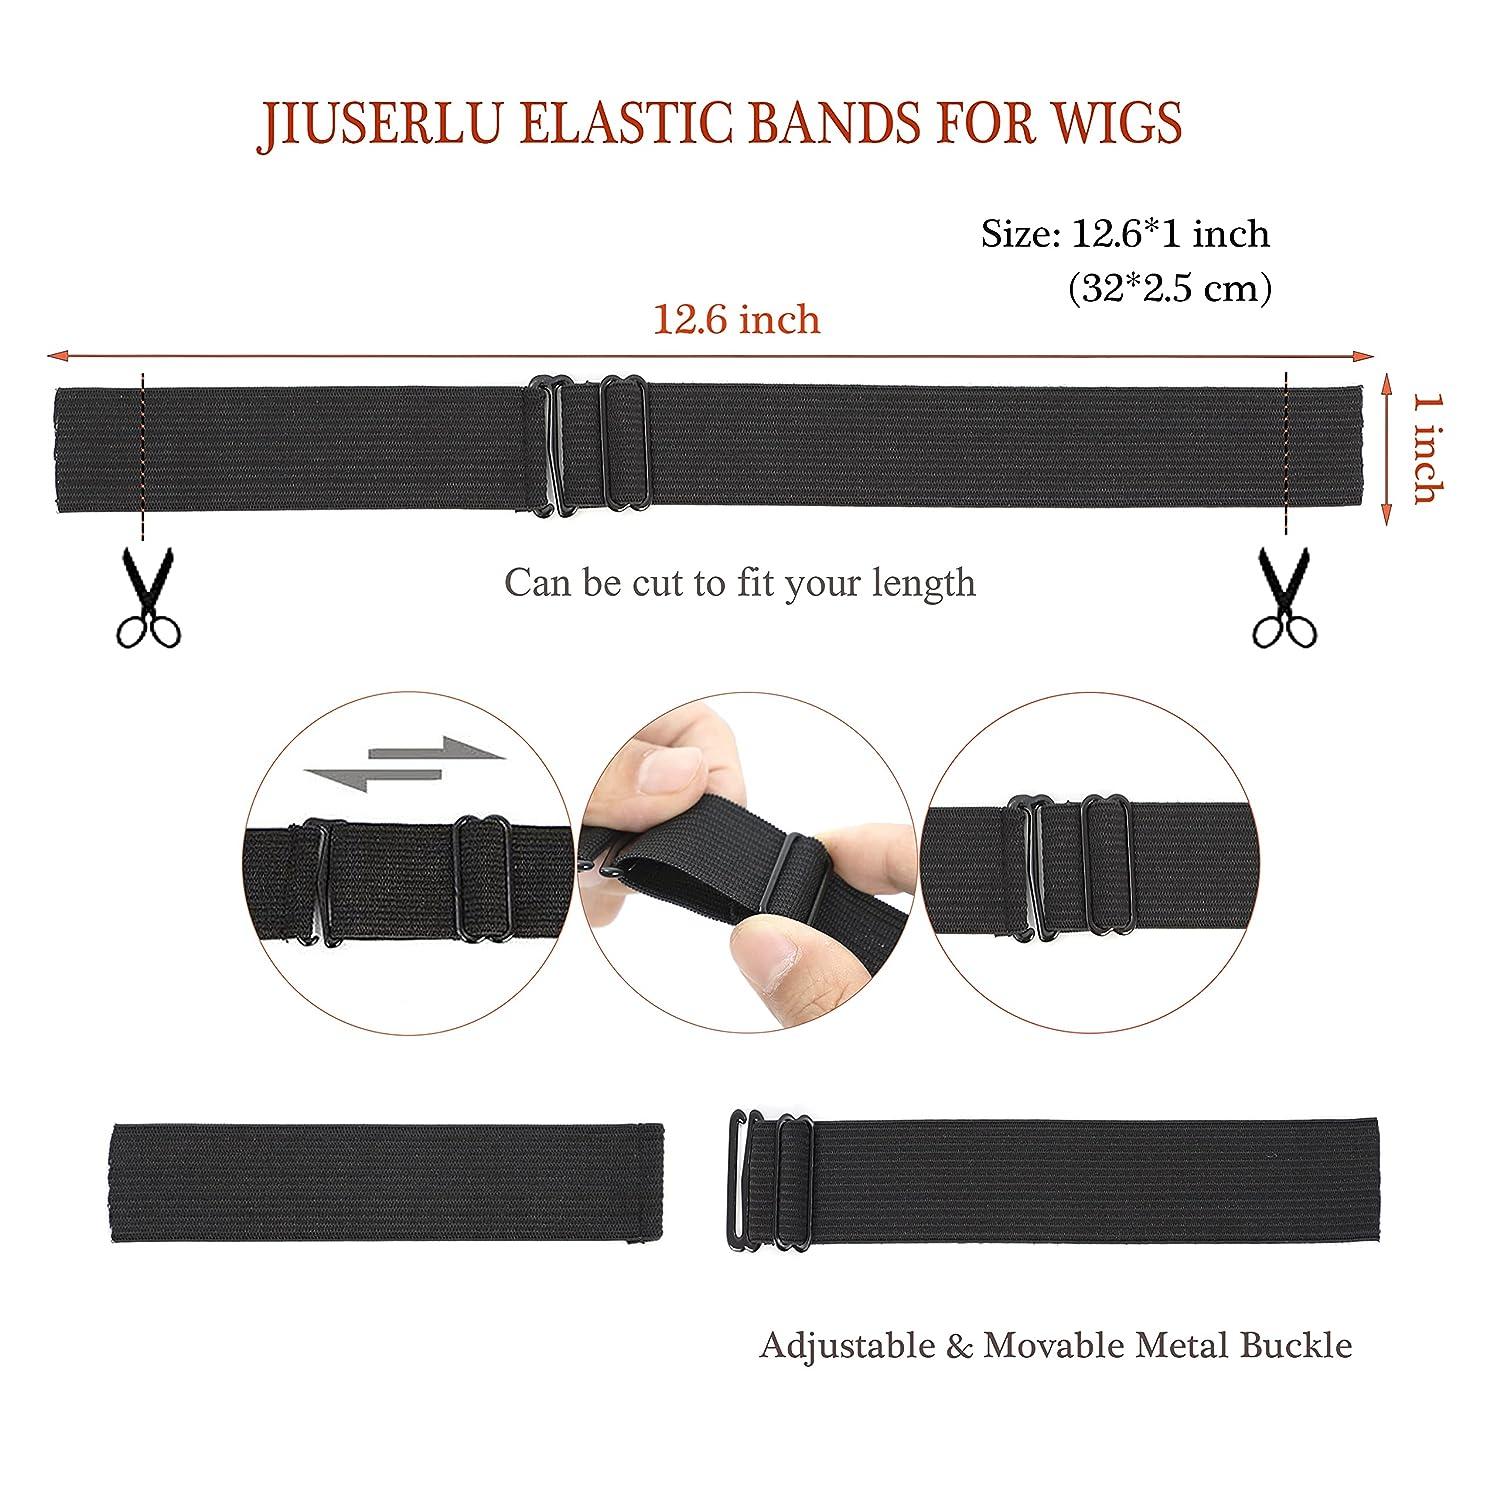 1Pcs Adjustable Elastic Band For Wigs Removable Rubber Band With Metal  Buckle For Fix Wig Adjustable Wig Straps For Making Wigs